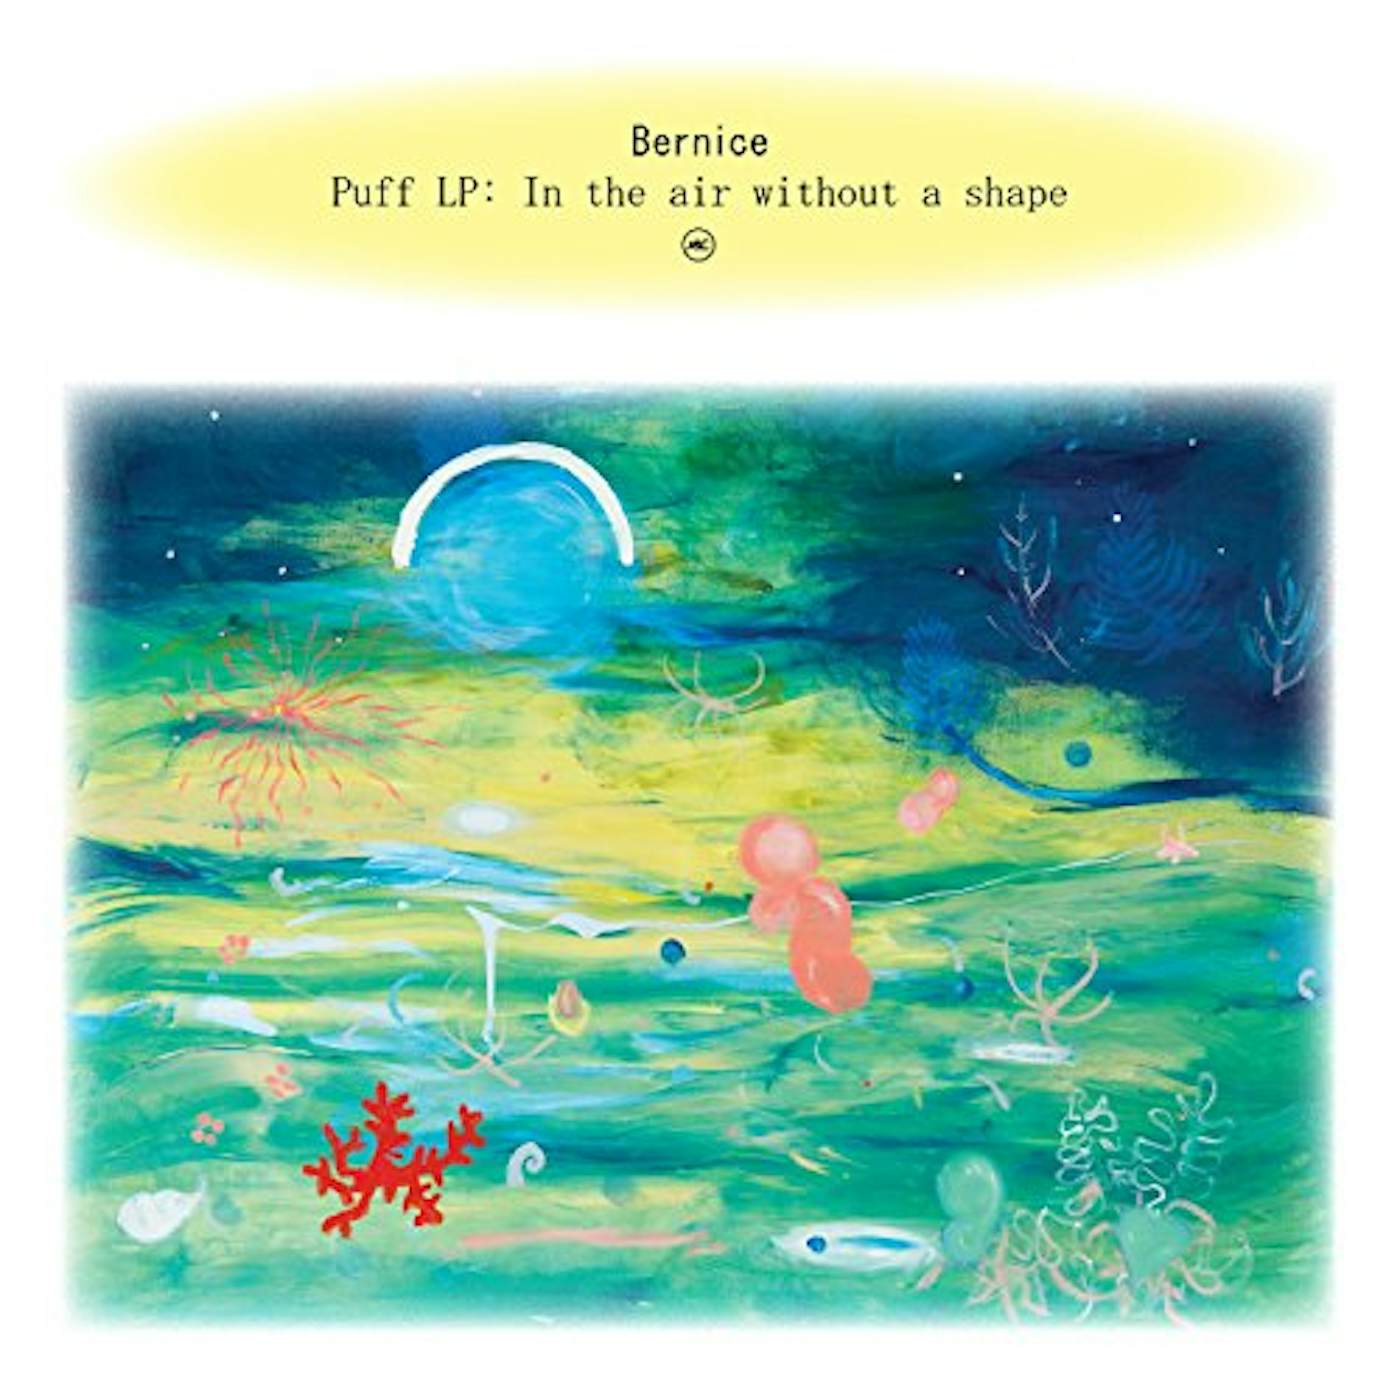 Bernice Puff: In The Air Without A Shape Vinyl Record